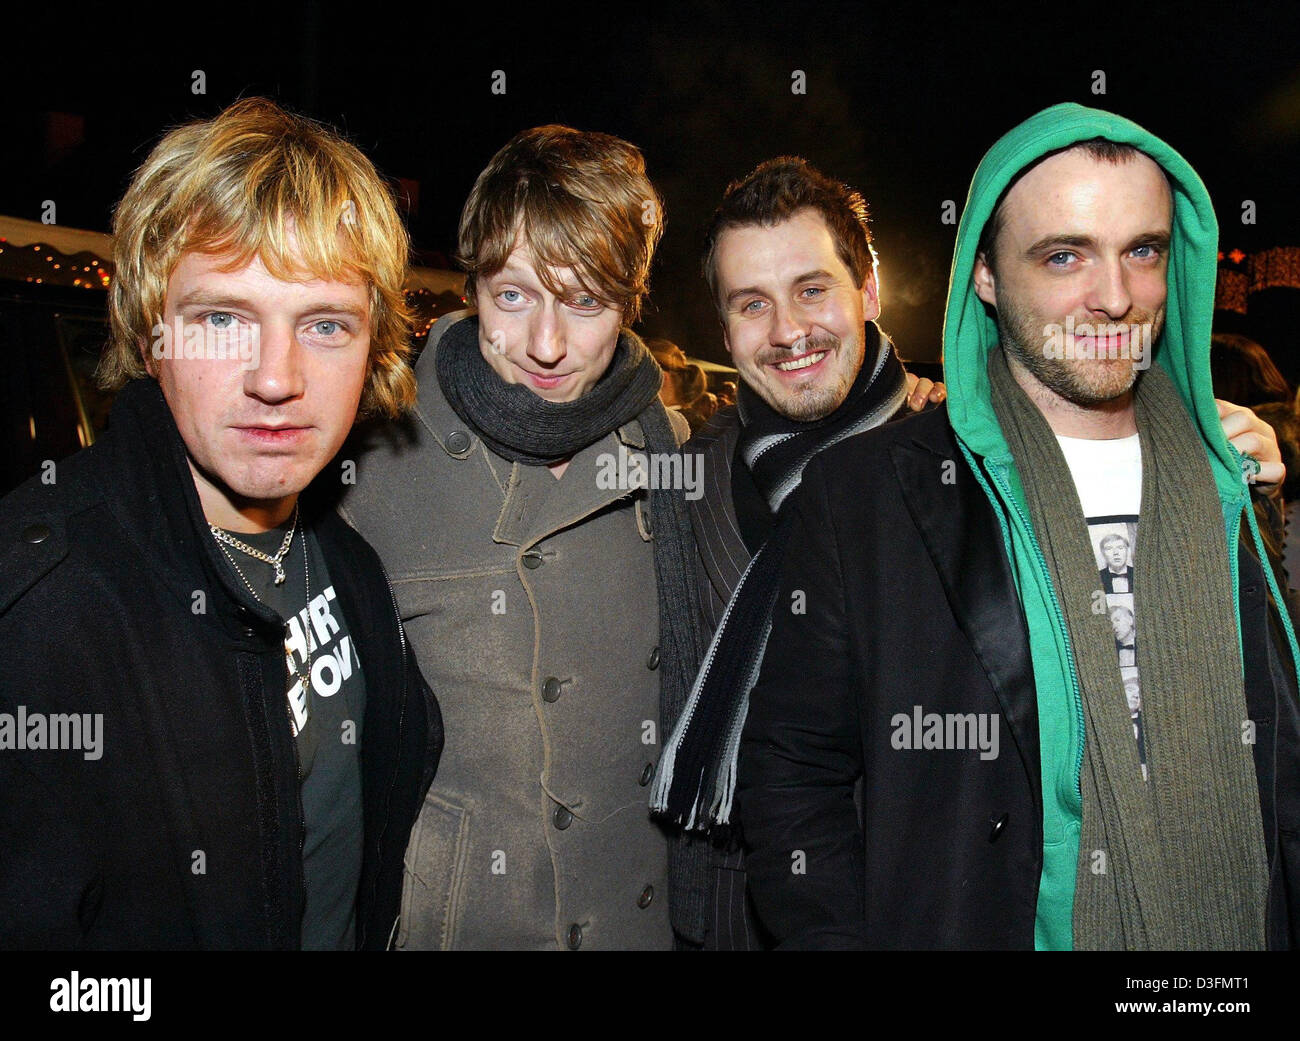 (dpa) - The band 'Travis' pose after the 'Eins Live Krone' award show in Oberhausen, Germany, 2 December 2004. Stock Photo